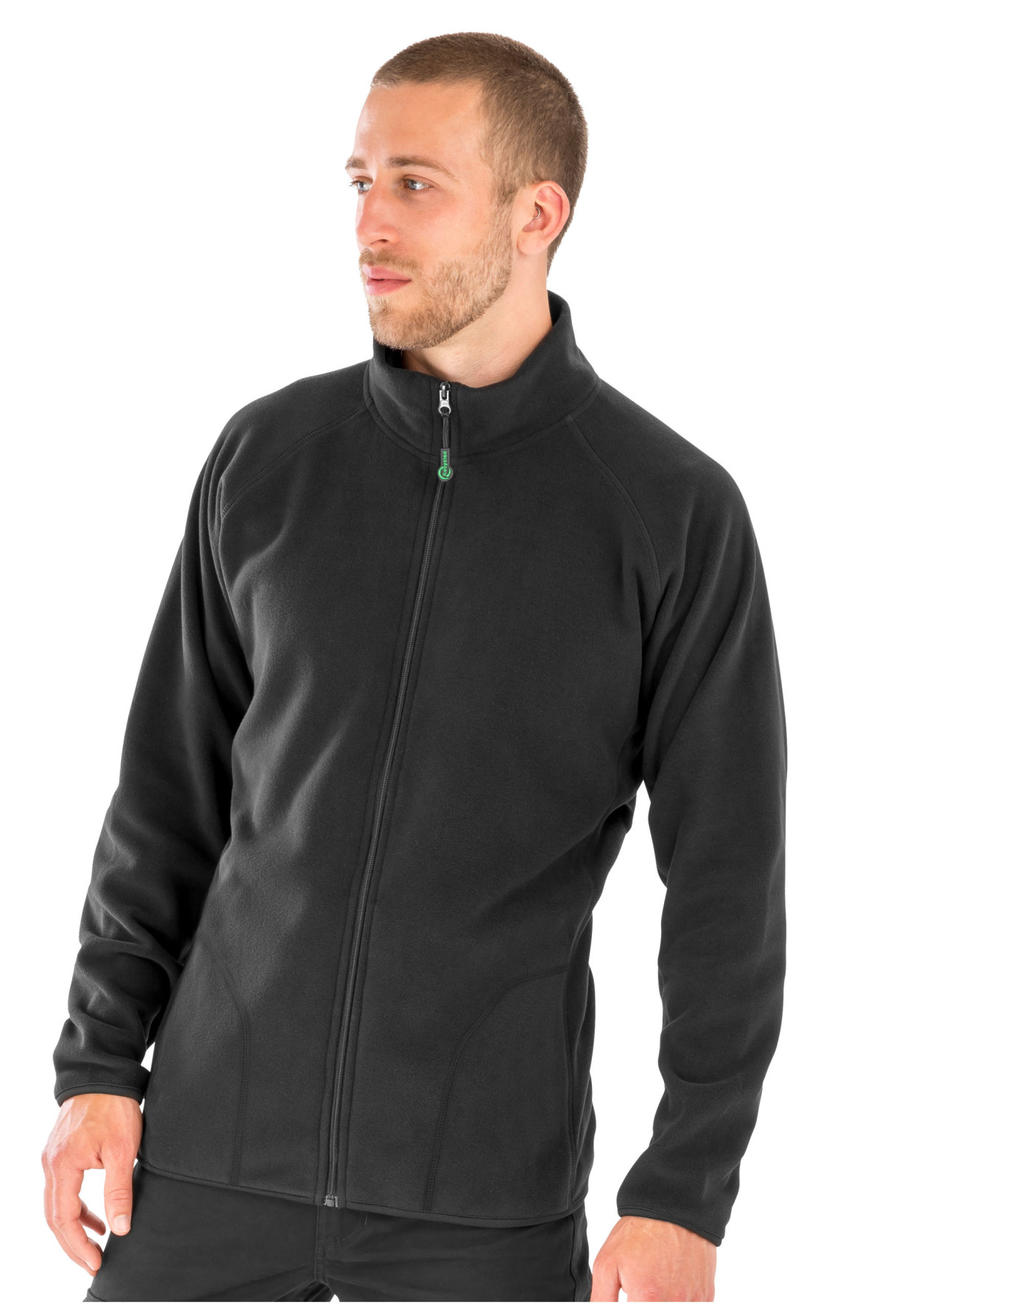  Recycled Microfleece Jacket in Farbe Black